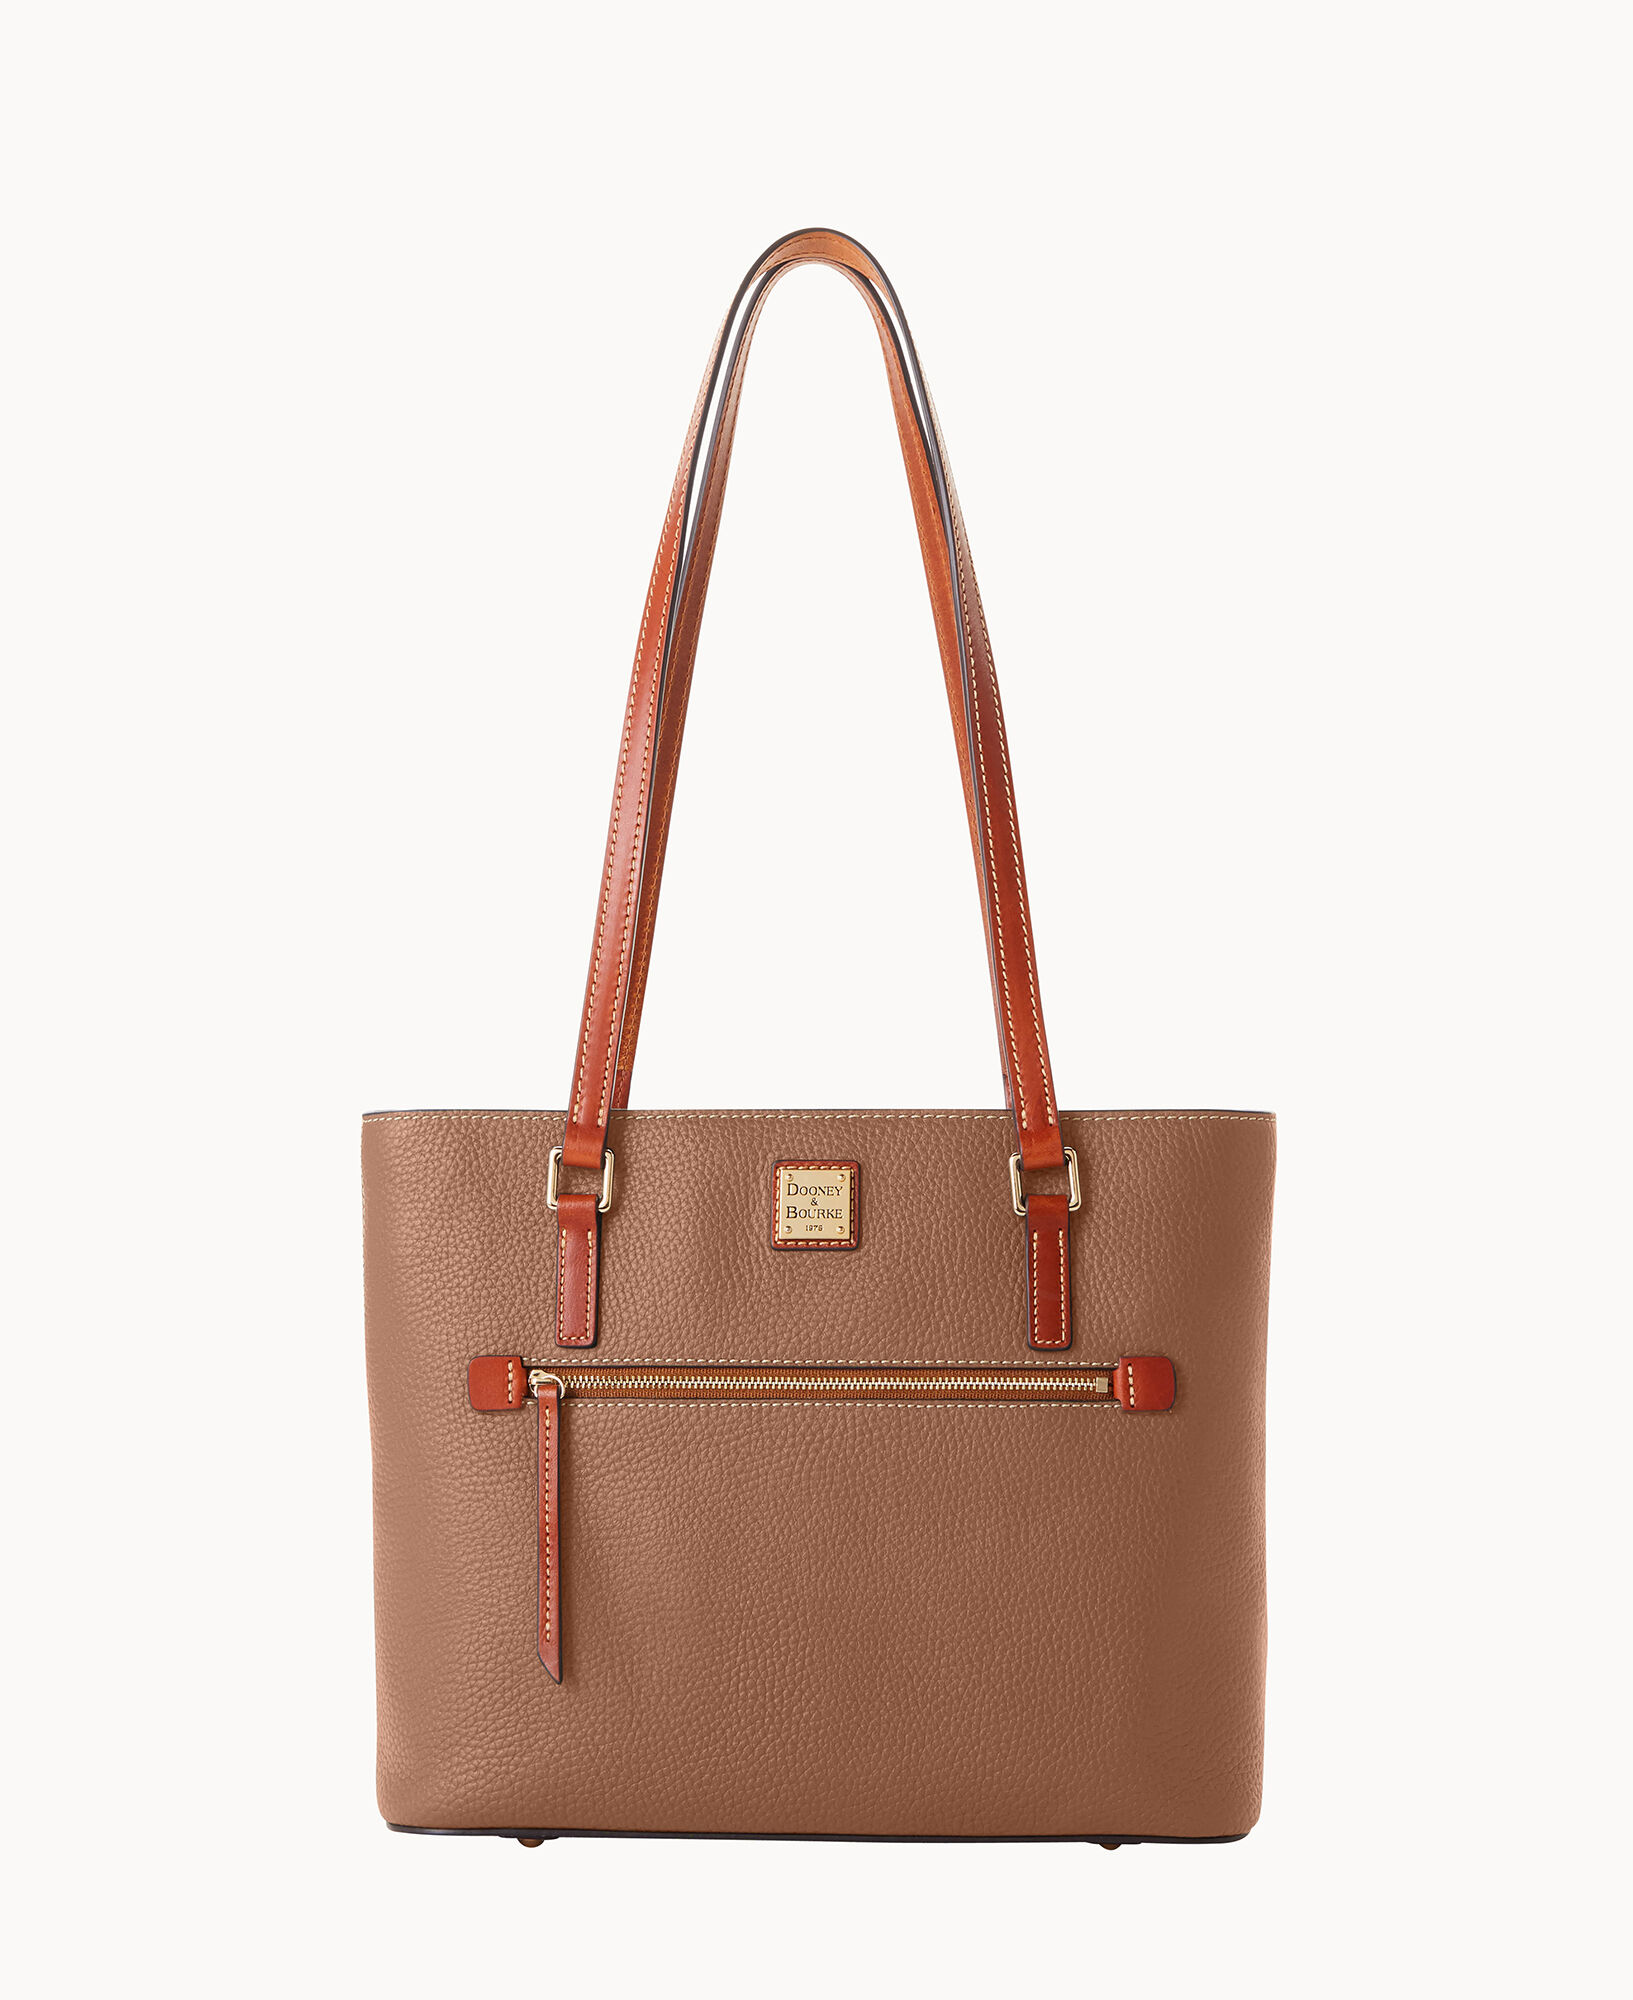 Dooney Bourke Pebble Collection Small Lexington Leather, 46% OFF